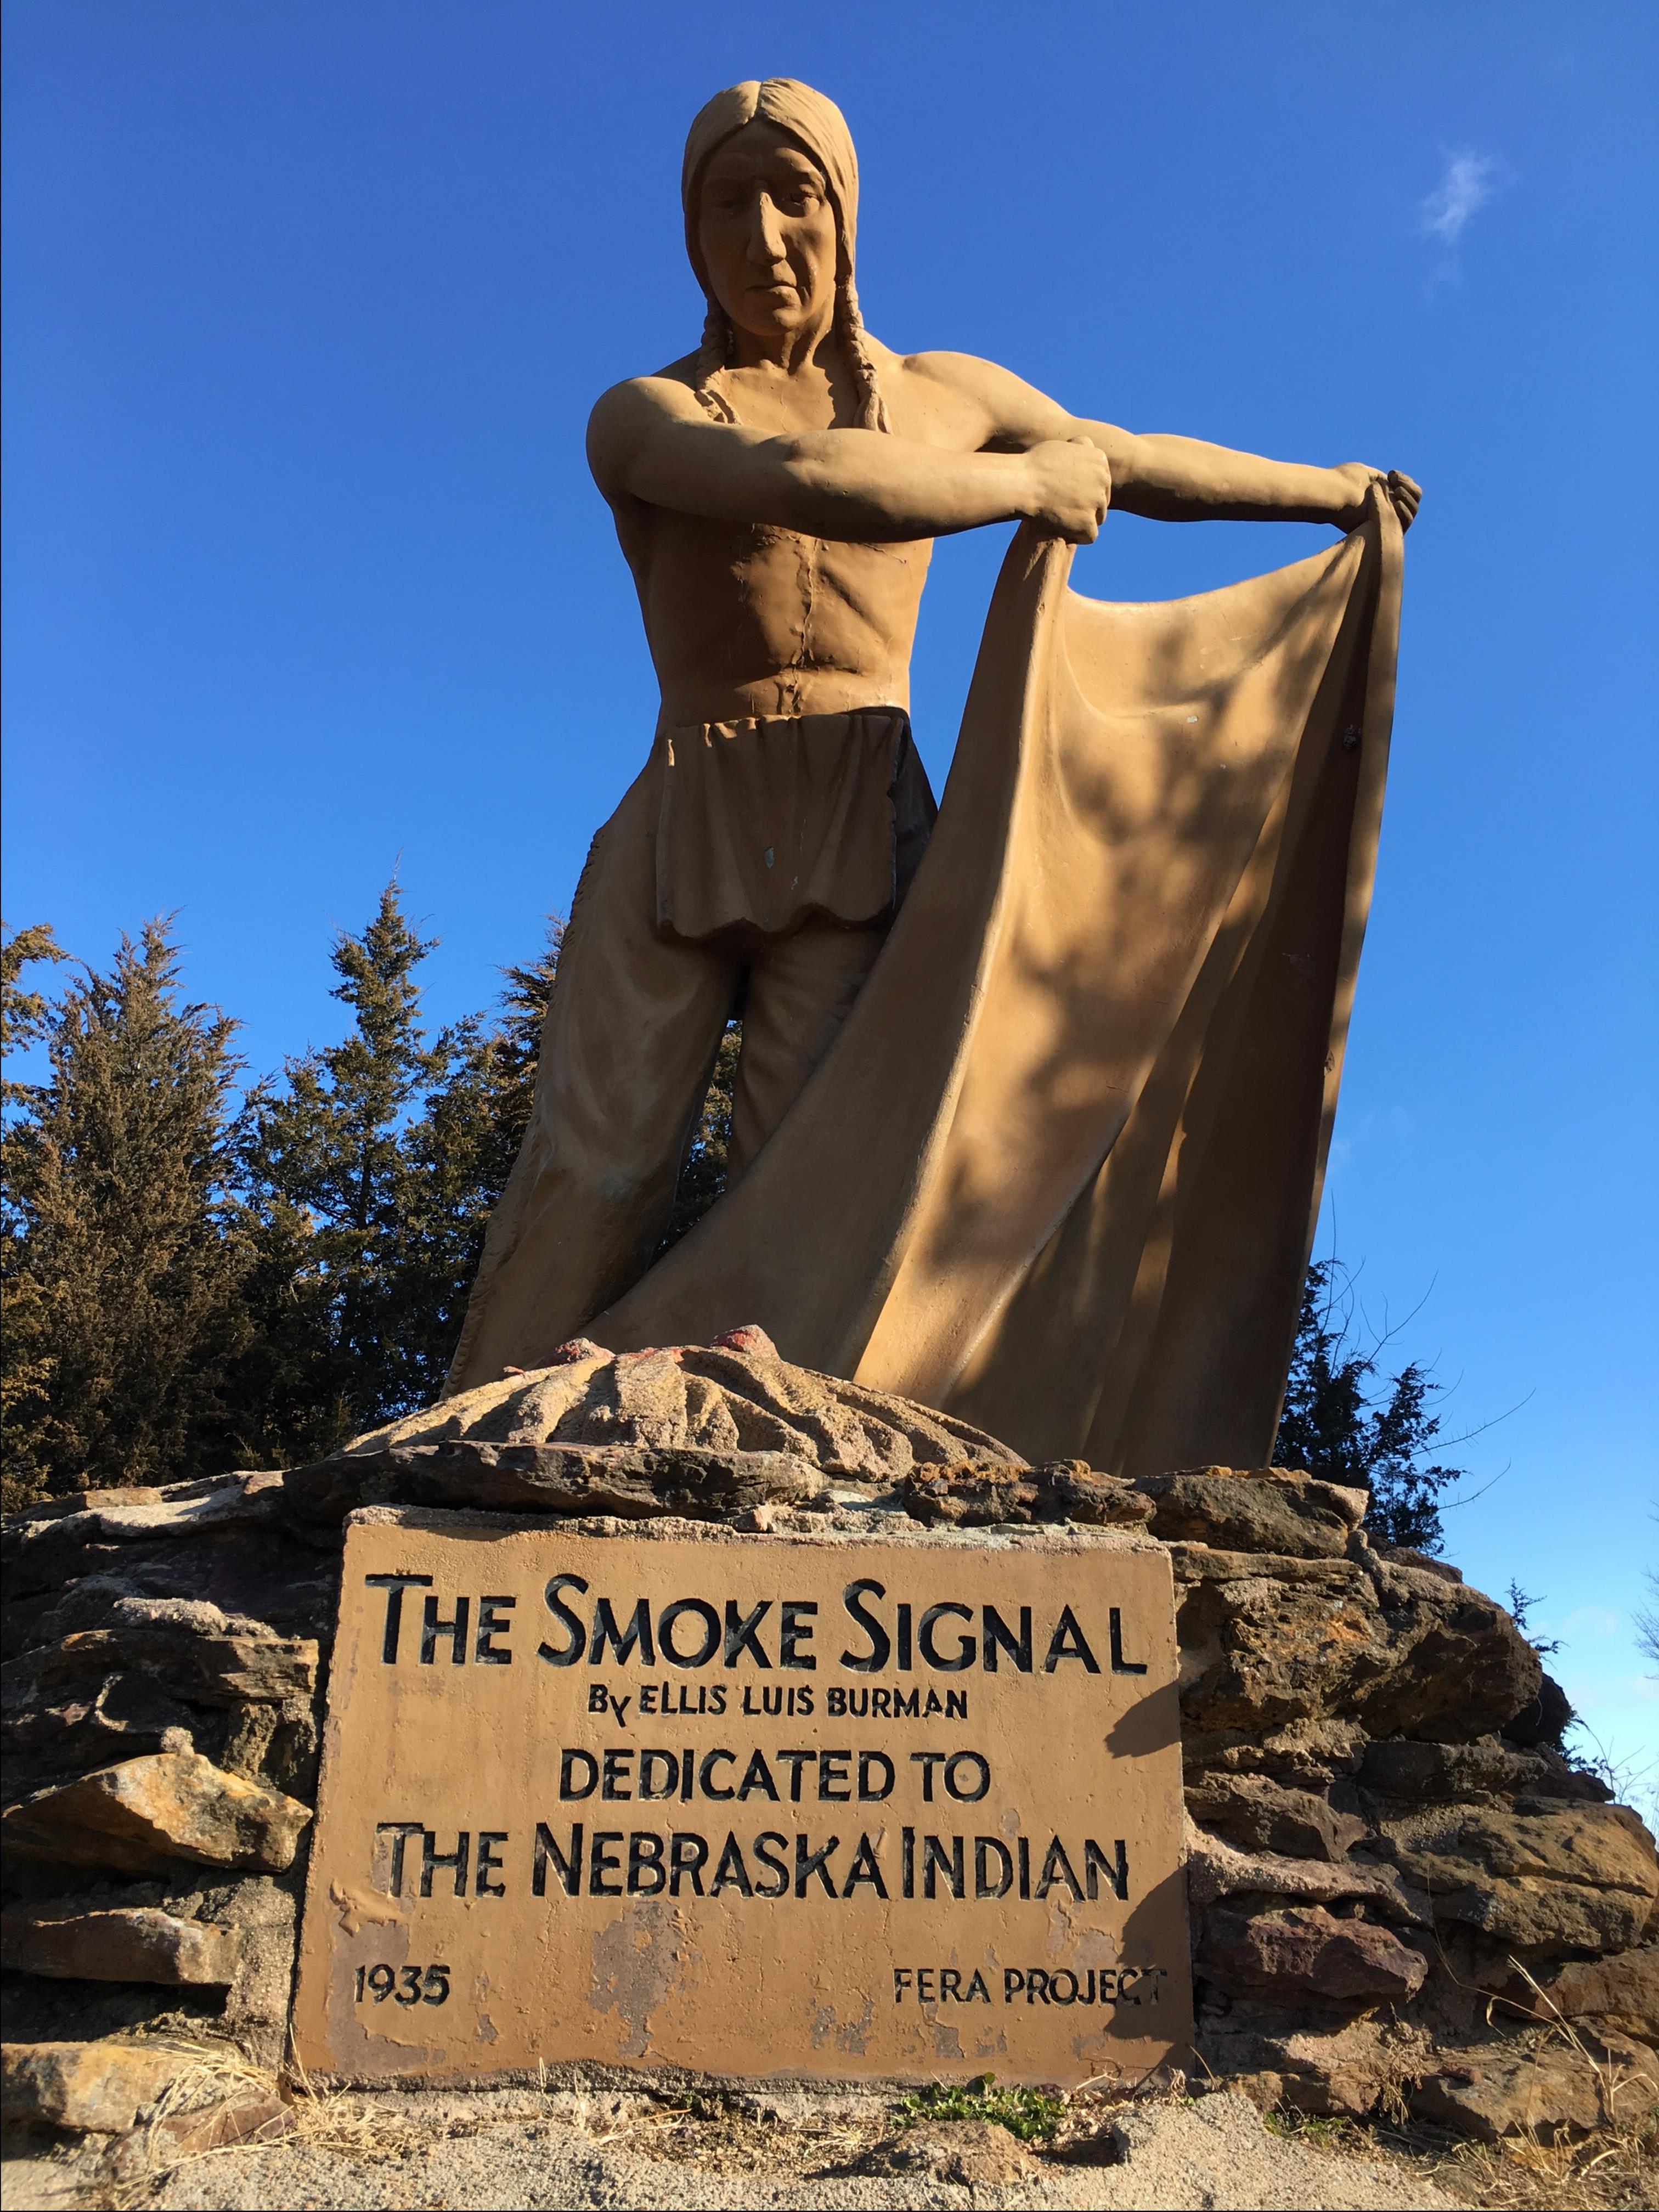 A full body image of Smoke Signal with the dedication plaque 